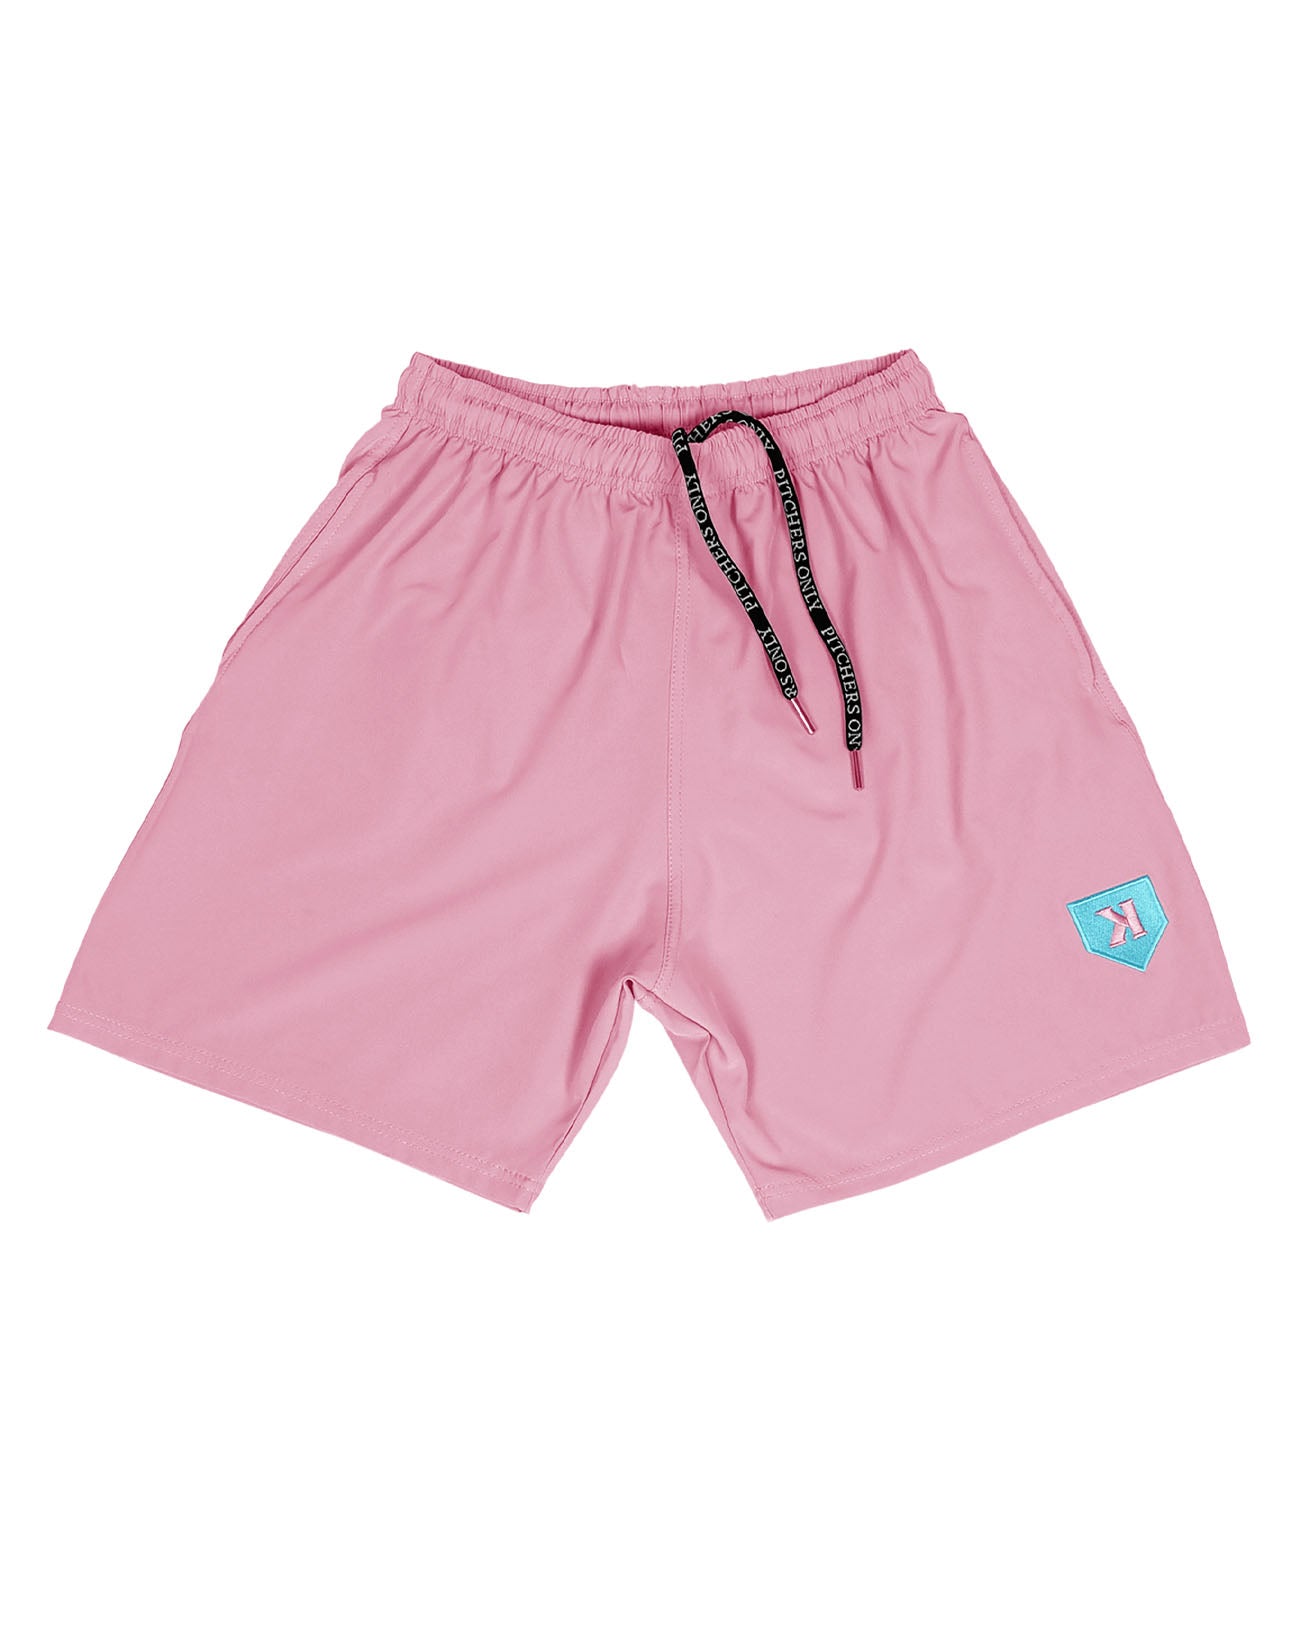 Cotton Candy Pink Training Shorts